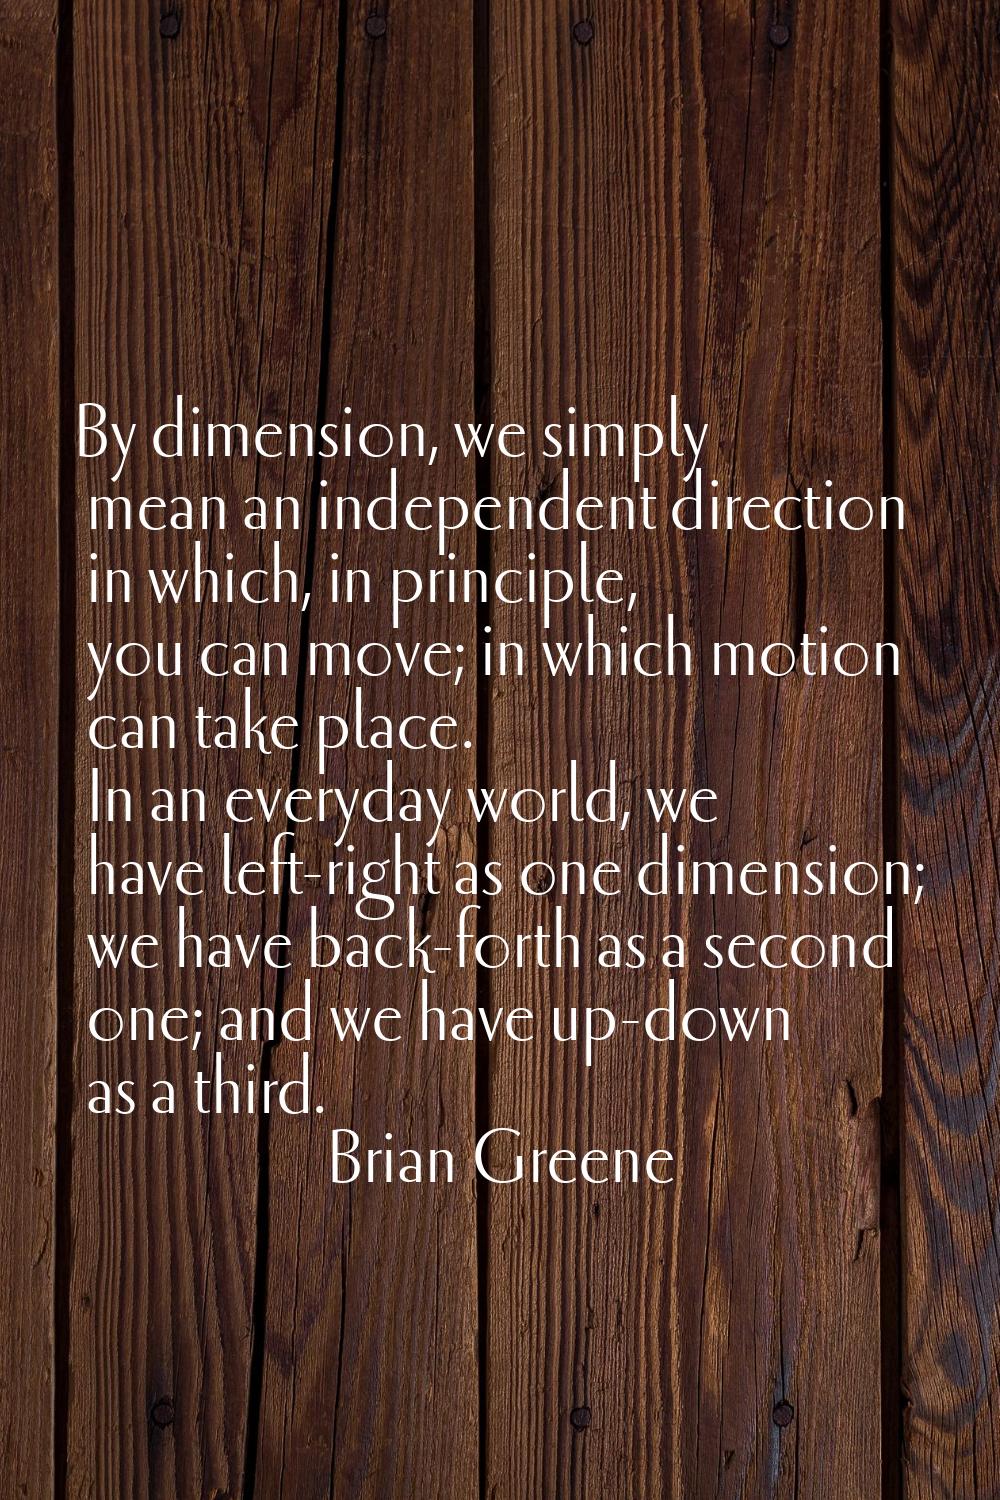 By dimension, we simply mean an independent direction in which, in principle, you can move; in whic